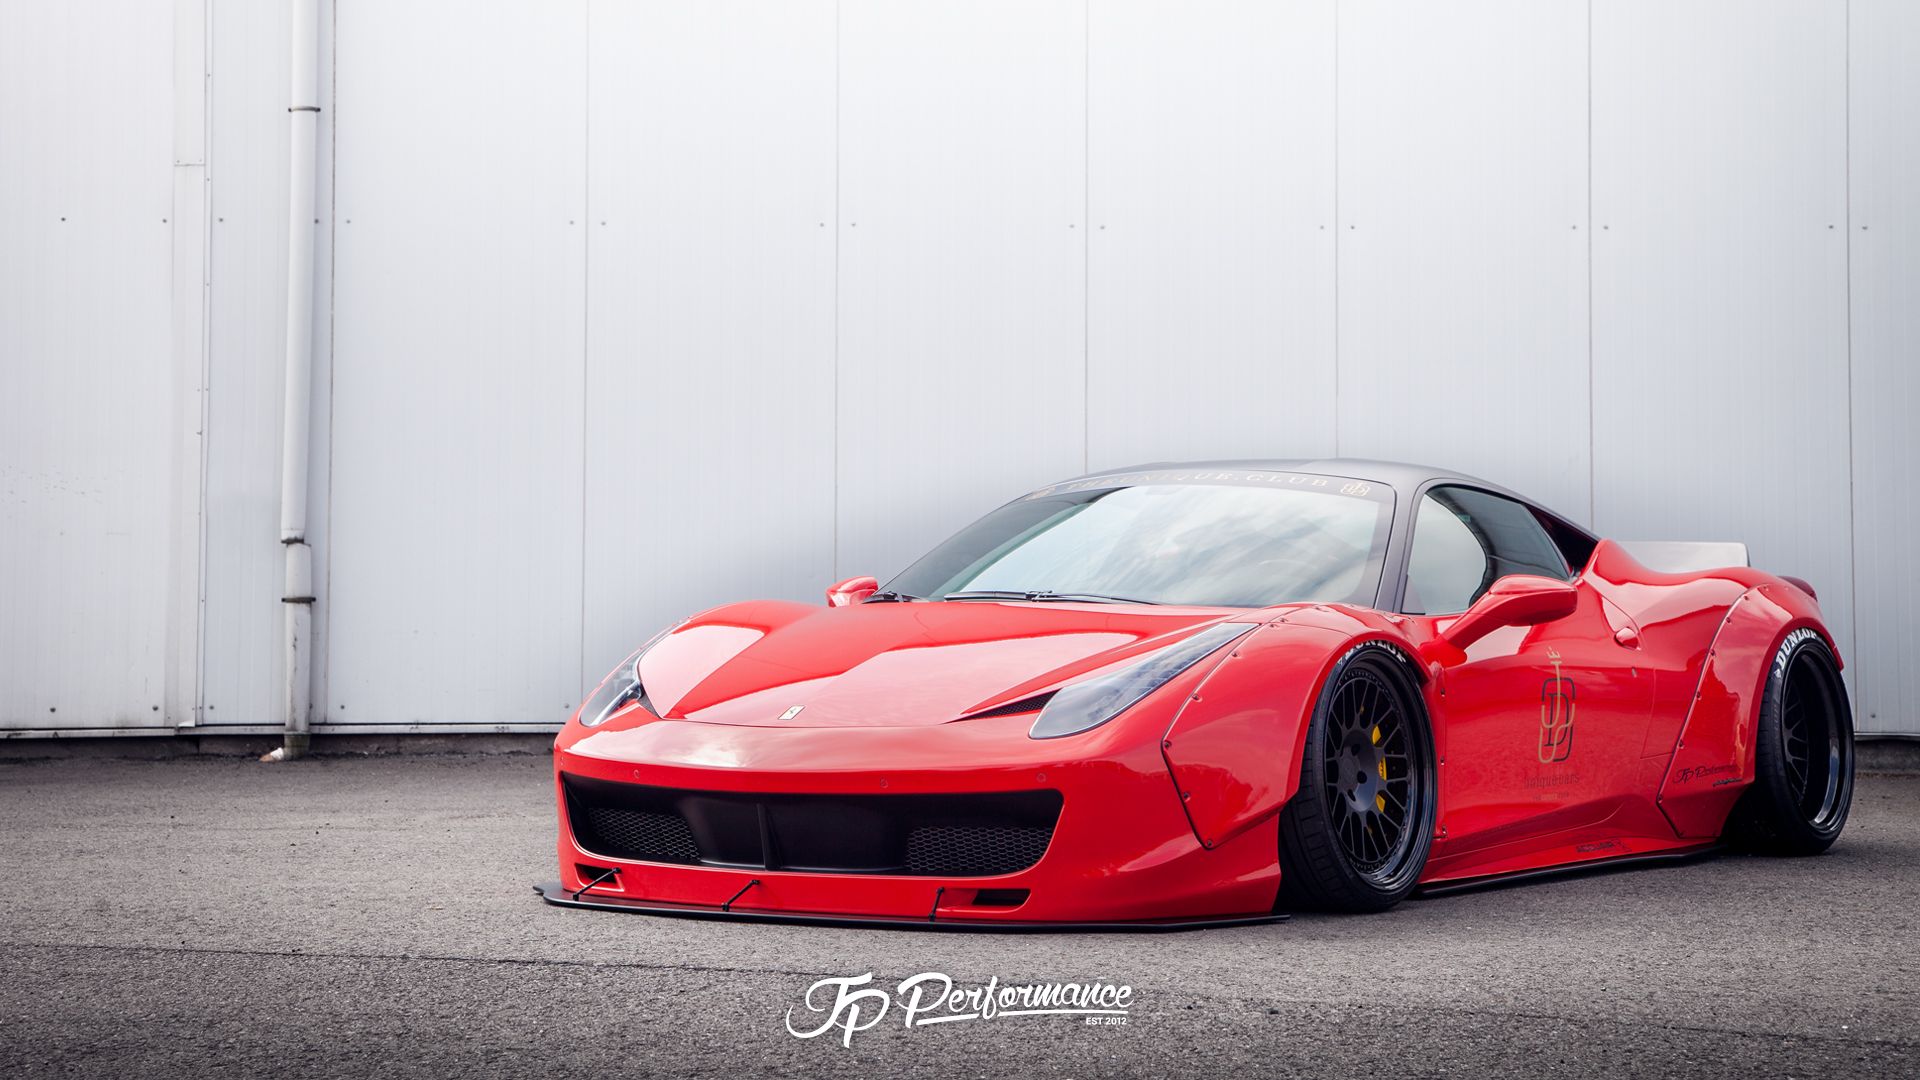 Nothing to see here. just a liberywalk style ferrari 458